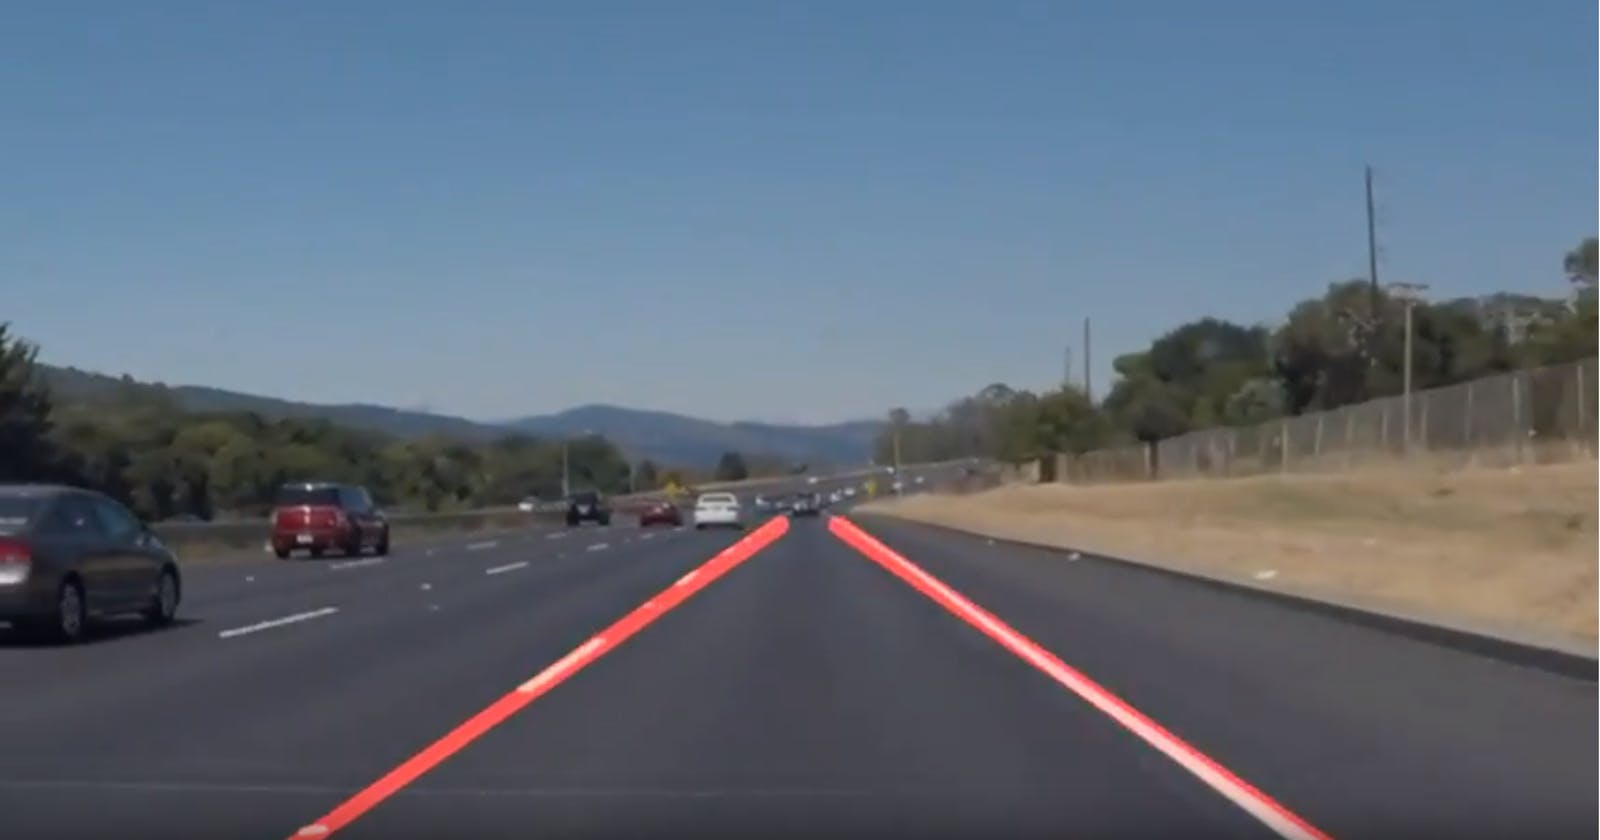 Finding Lane Lines on the Road using OpenCV